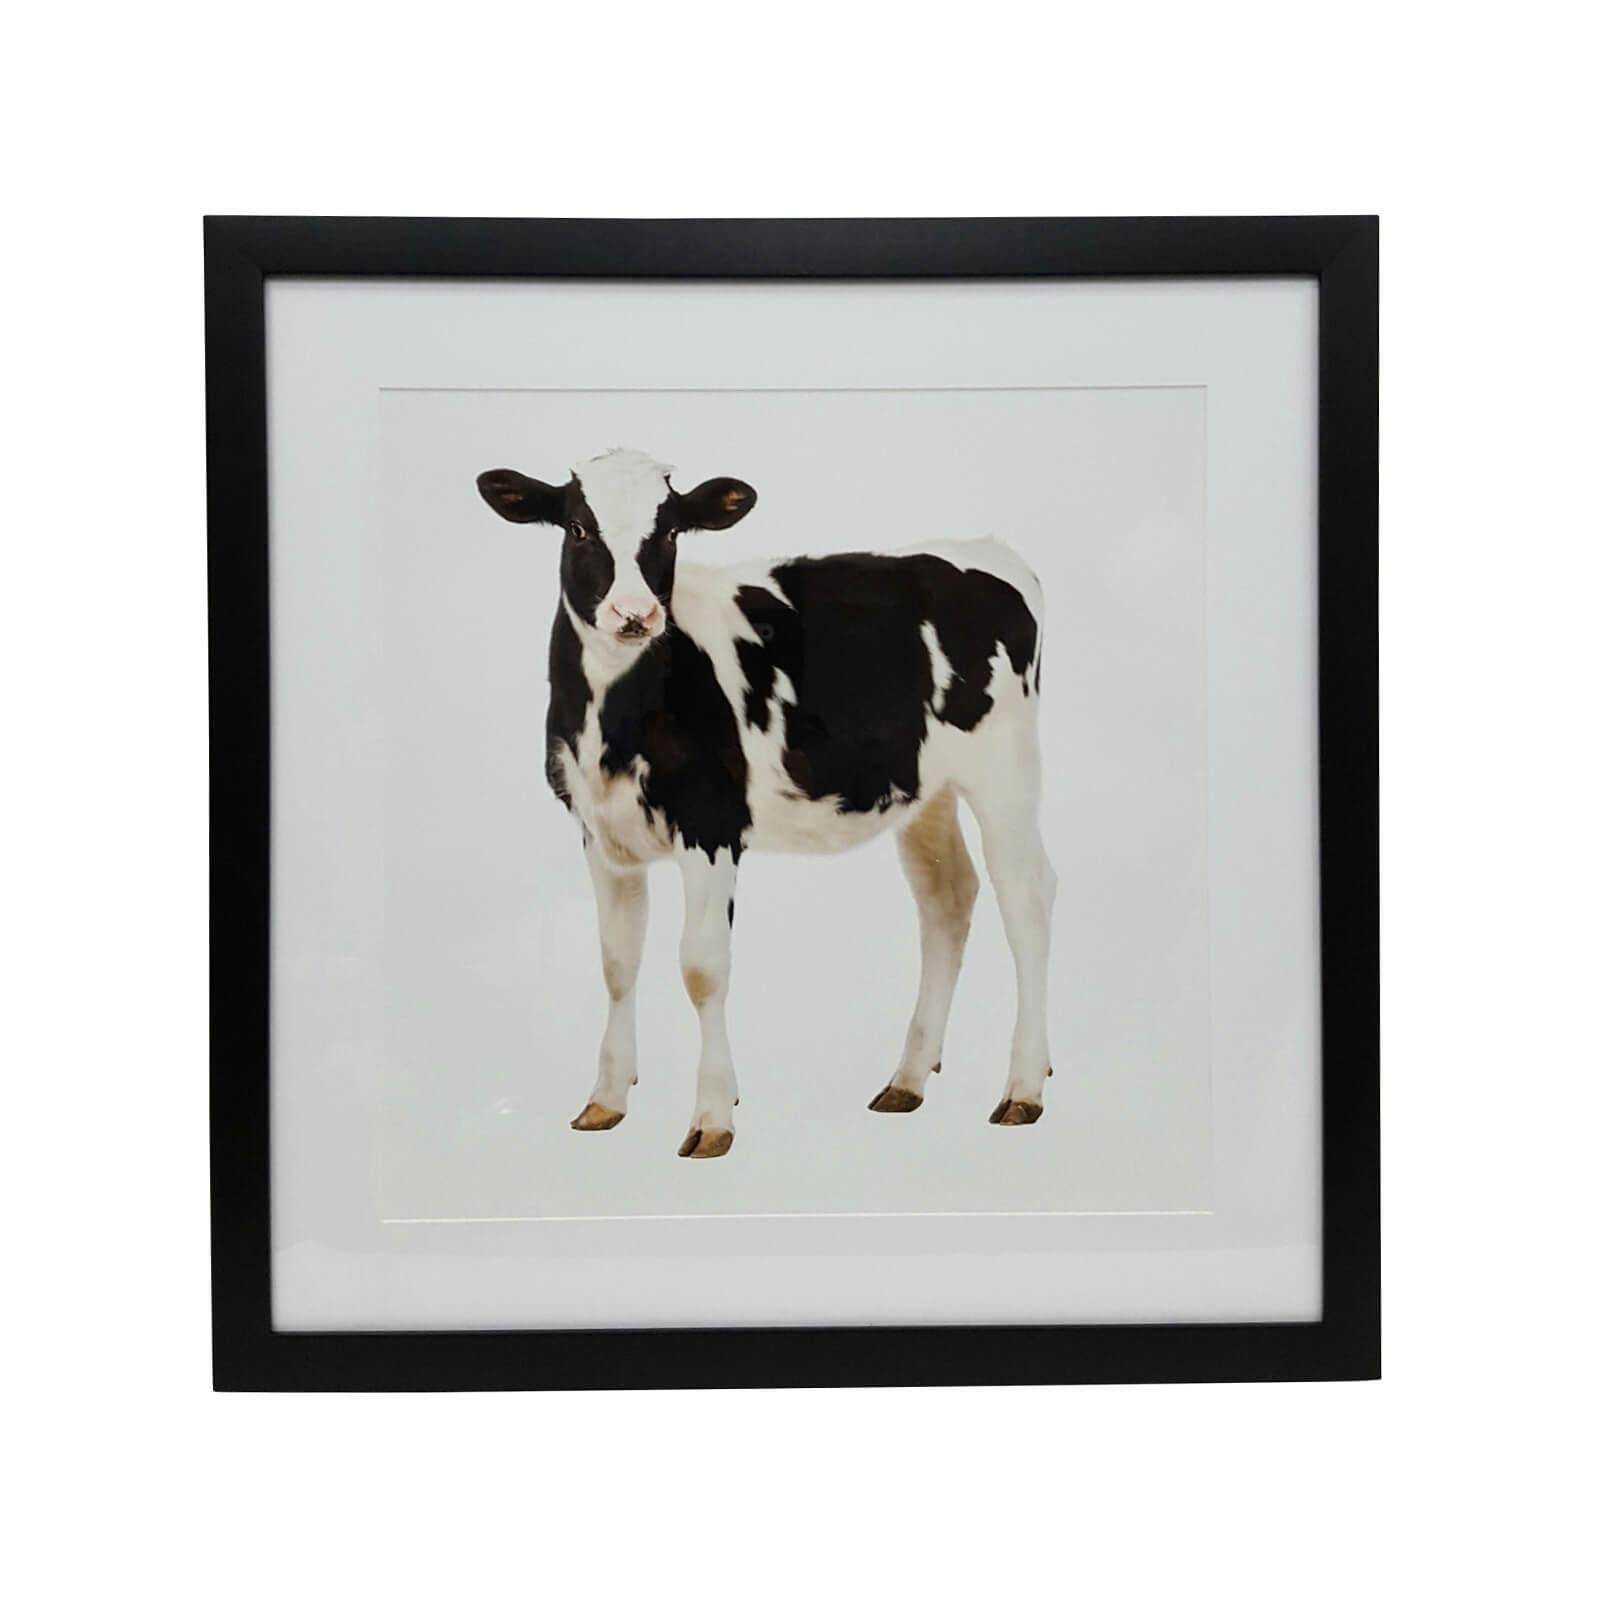 Beautiful Cow Photograph. Uniquely Framed in black matte with Plexiglas. Bespoke configurations available upon request